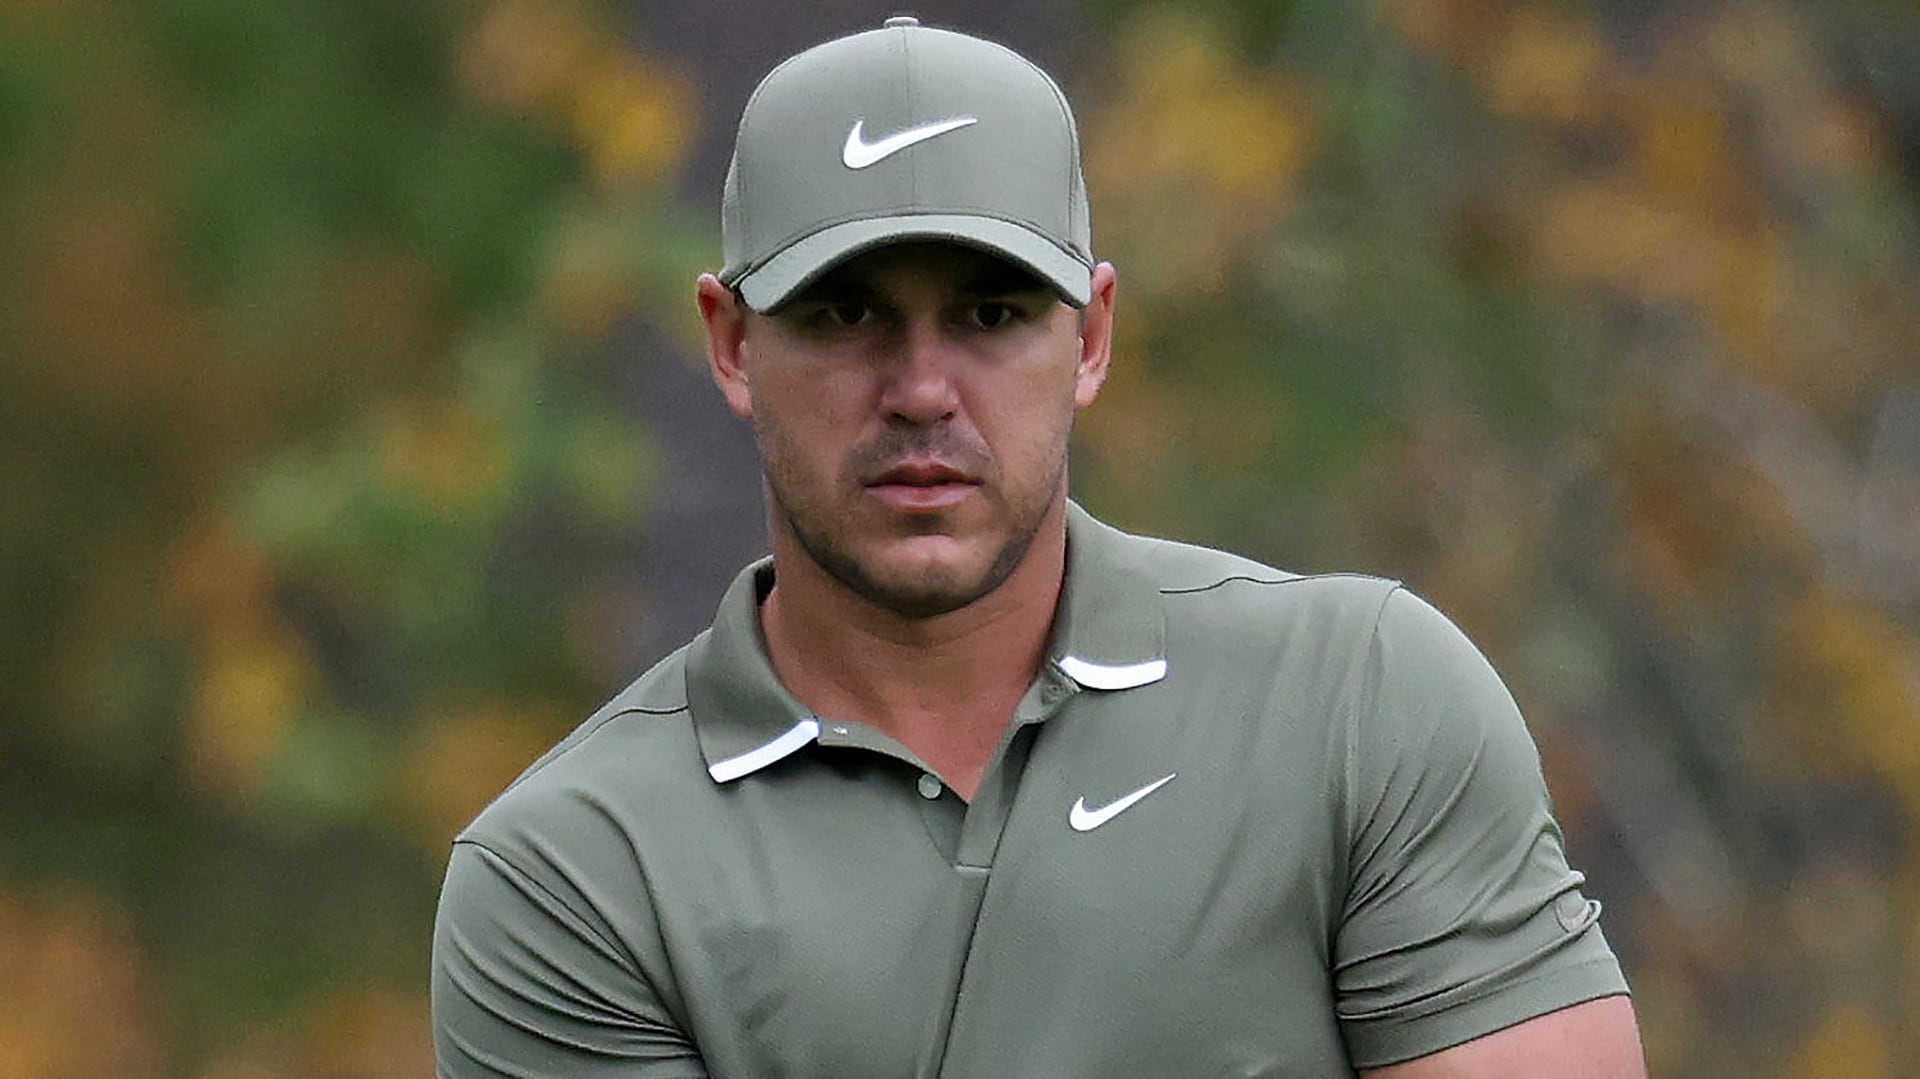 2020 Masters: Feeling like old self and with old driver, Brooks Koepka ready to go